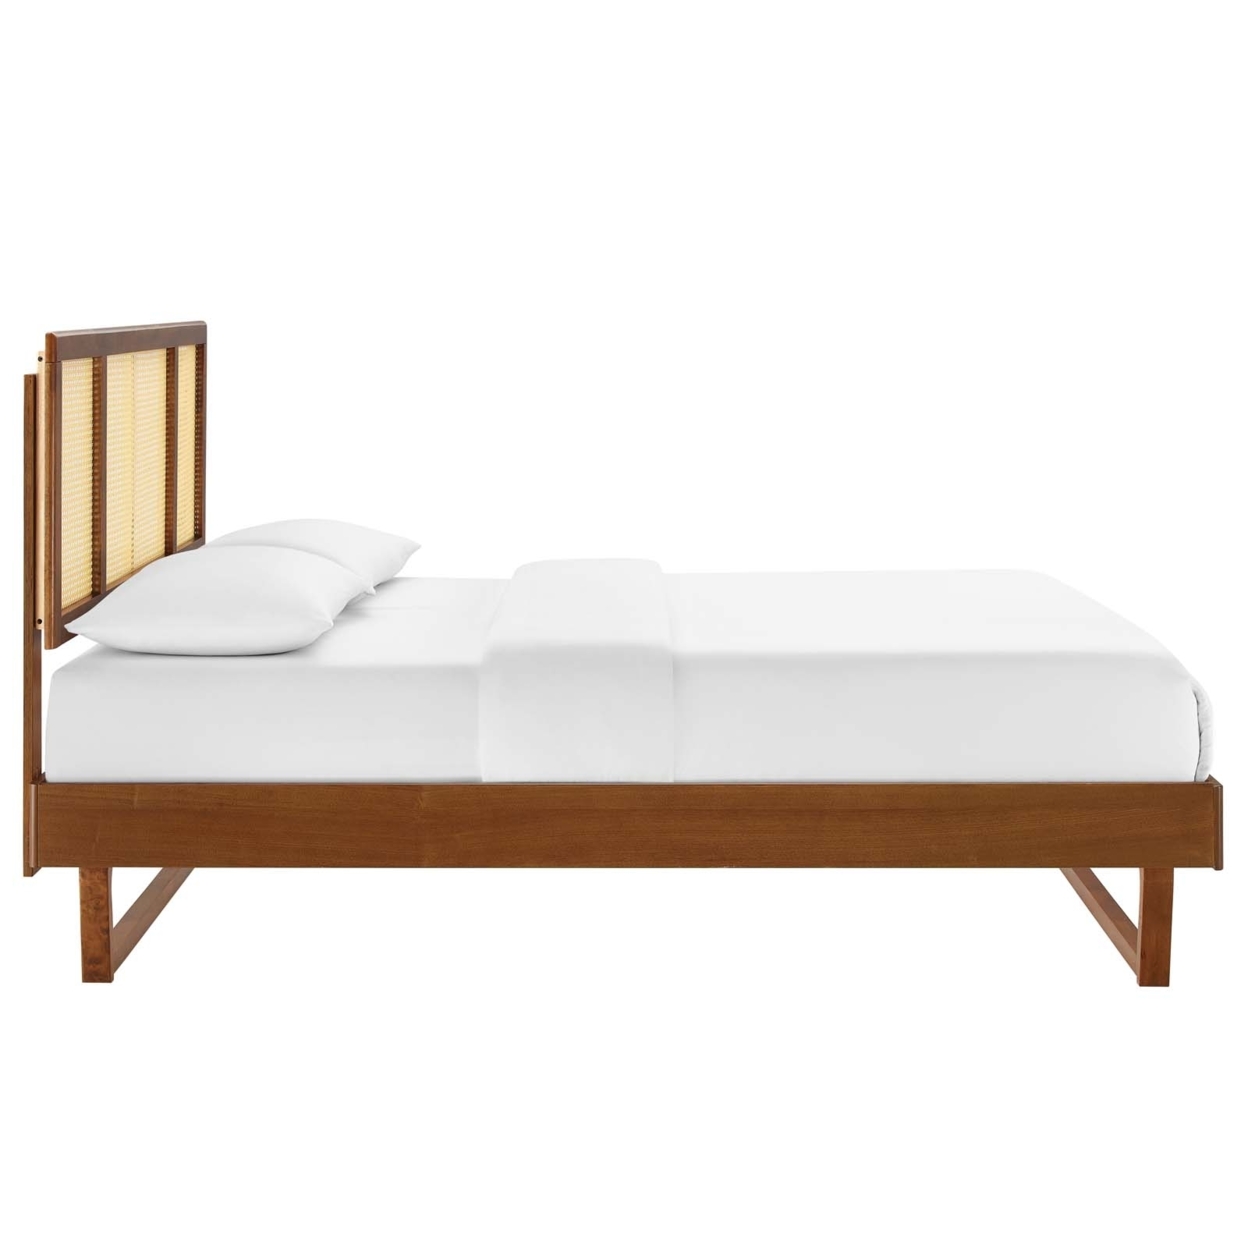 Kelsea Cane And Wood Full Platform Bed With Angular Legs, Walnut